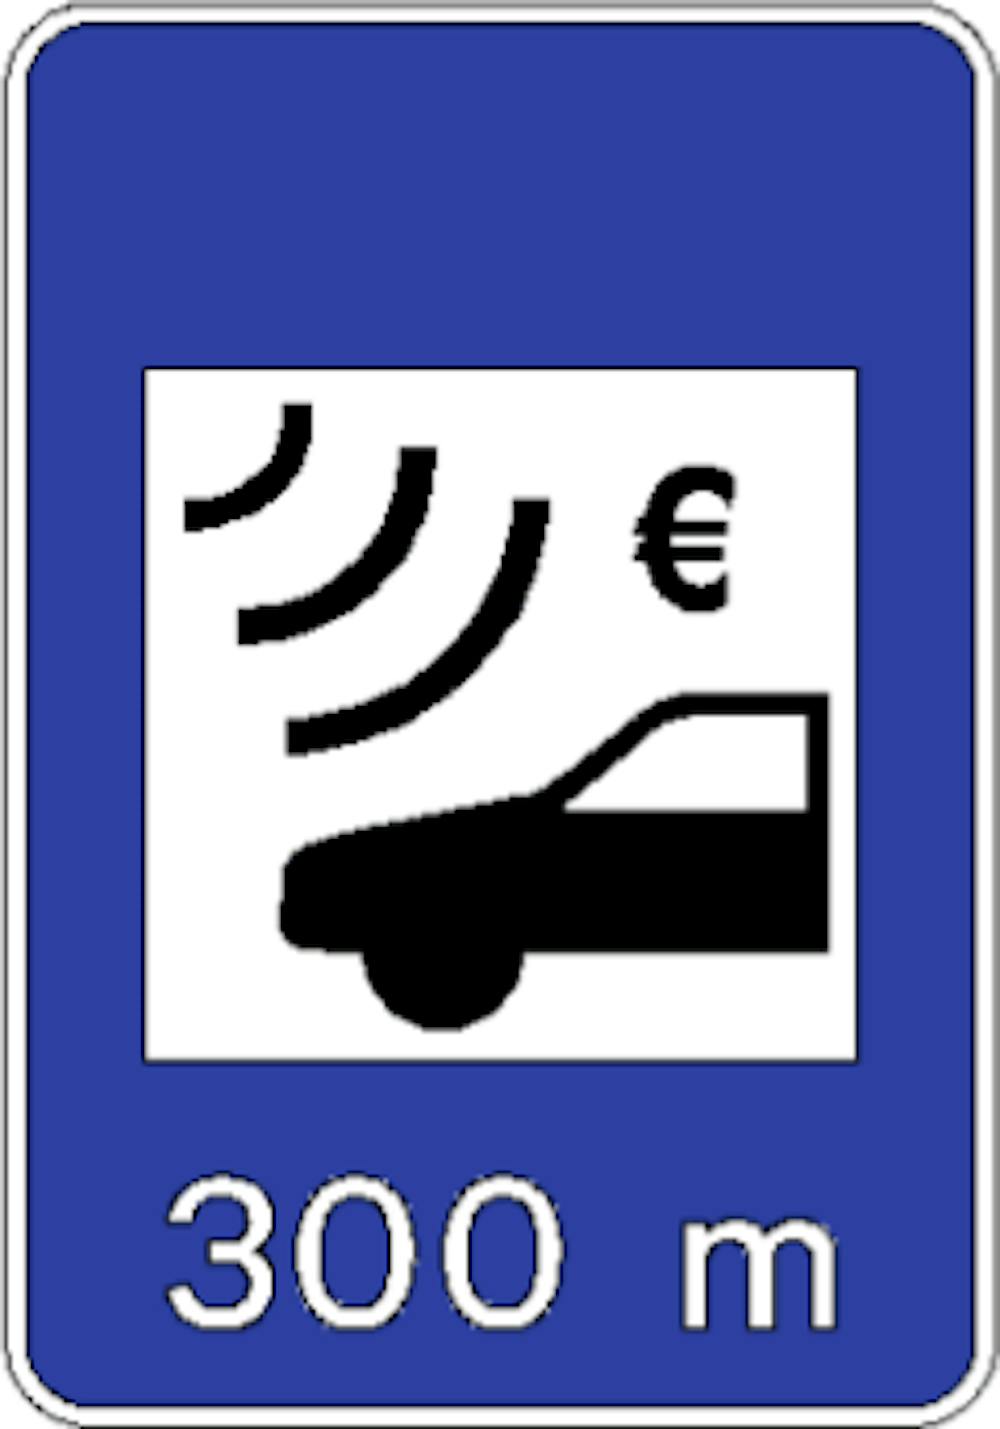 Renting a car and driving on toll roads in Portugal